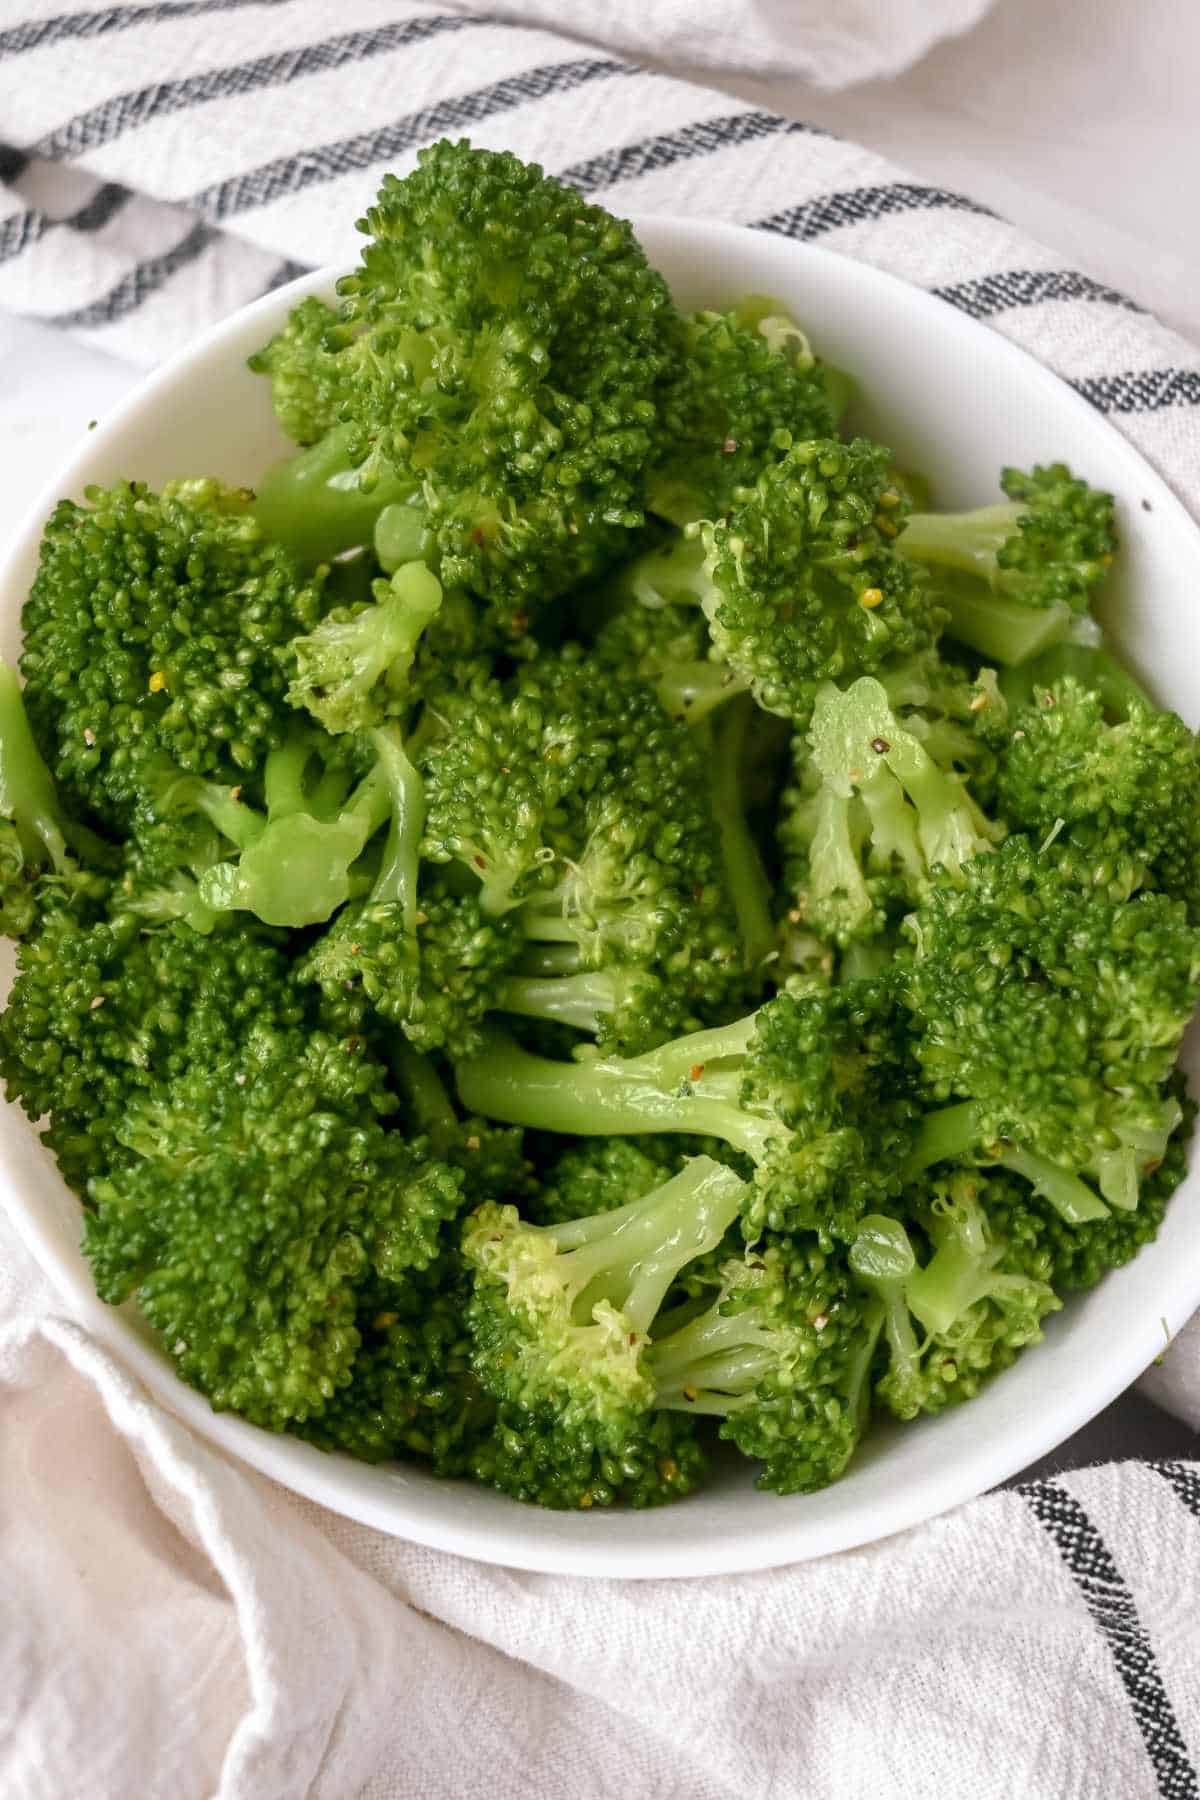 bowl of steamed broccoli in a white bowl on top of a blue and white striped towel.